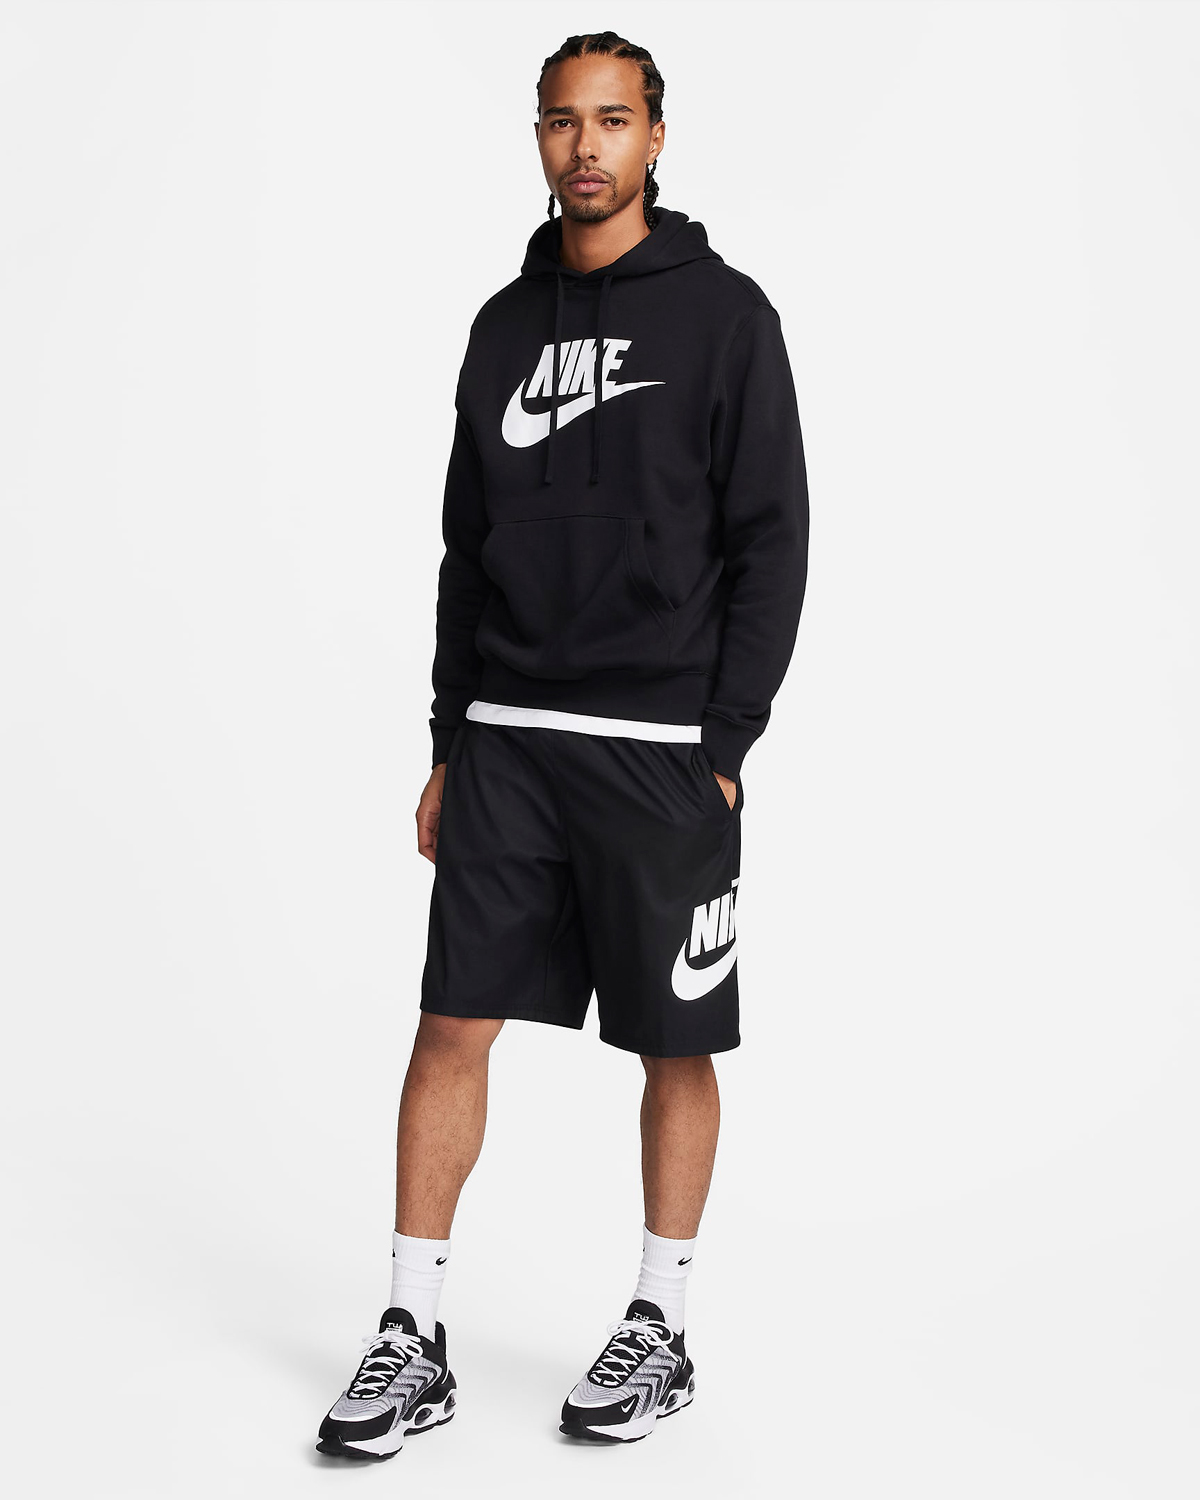 Nike-Club-Woven-Shorts-Black-White-Outfit